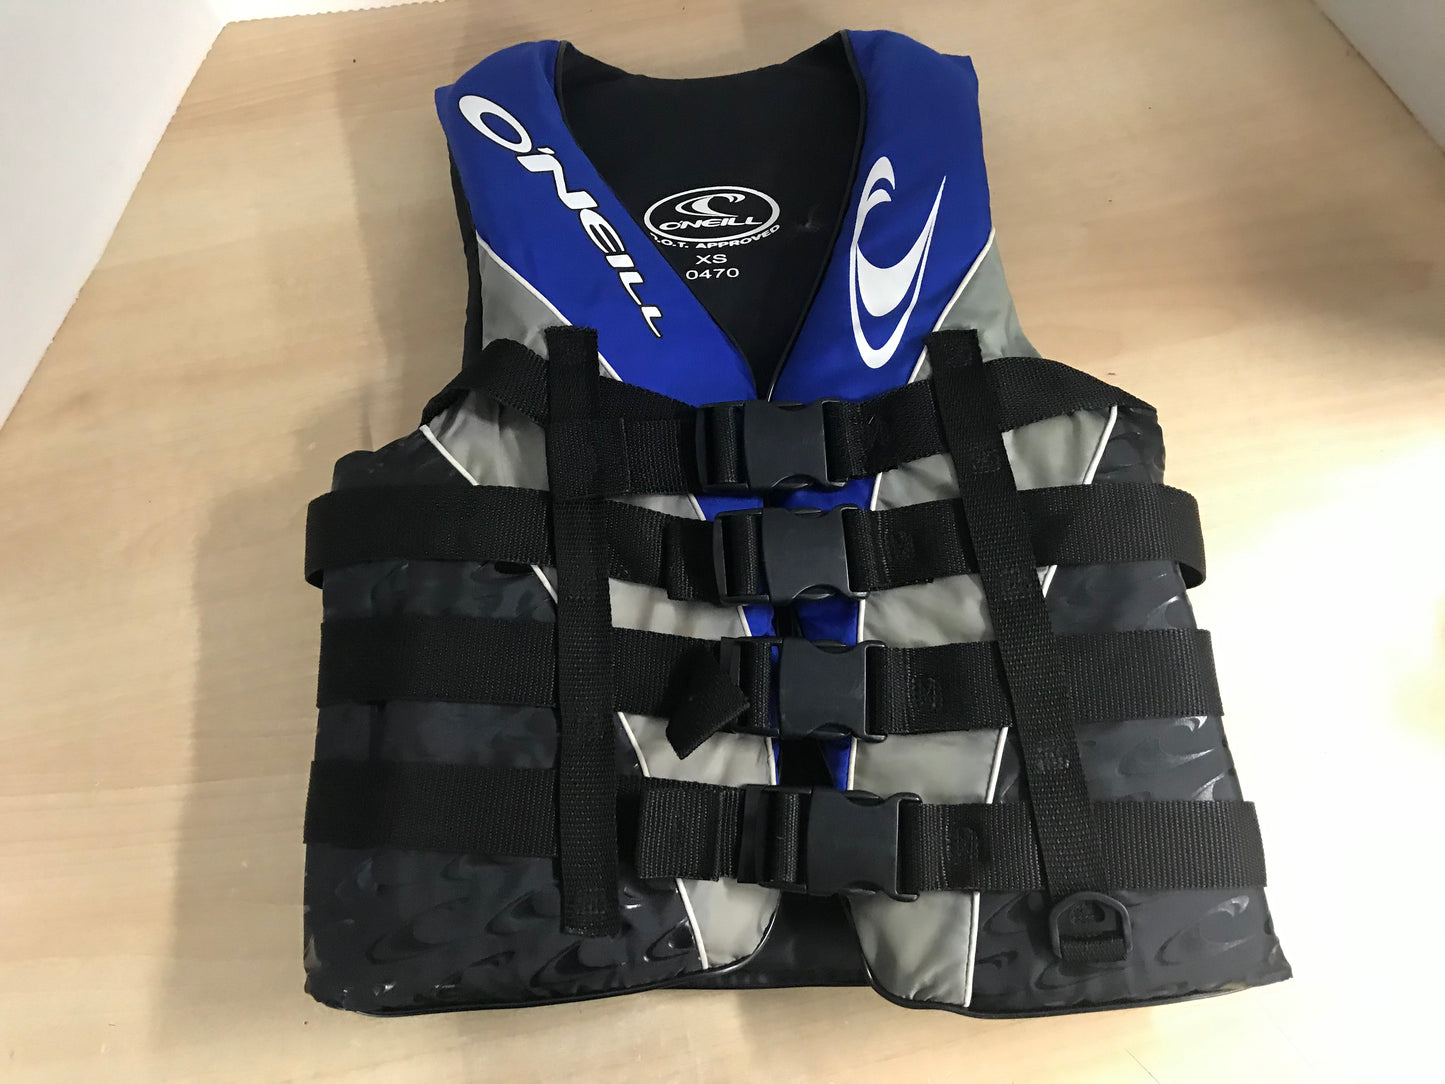 Life Jacket Adult Size X Small Oneill Black Blue Excellent As New